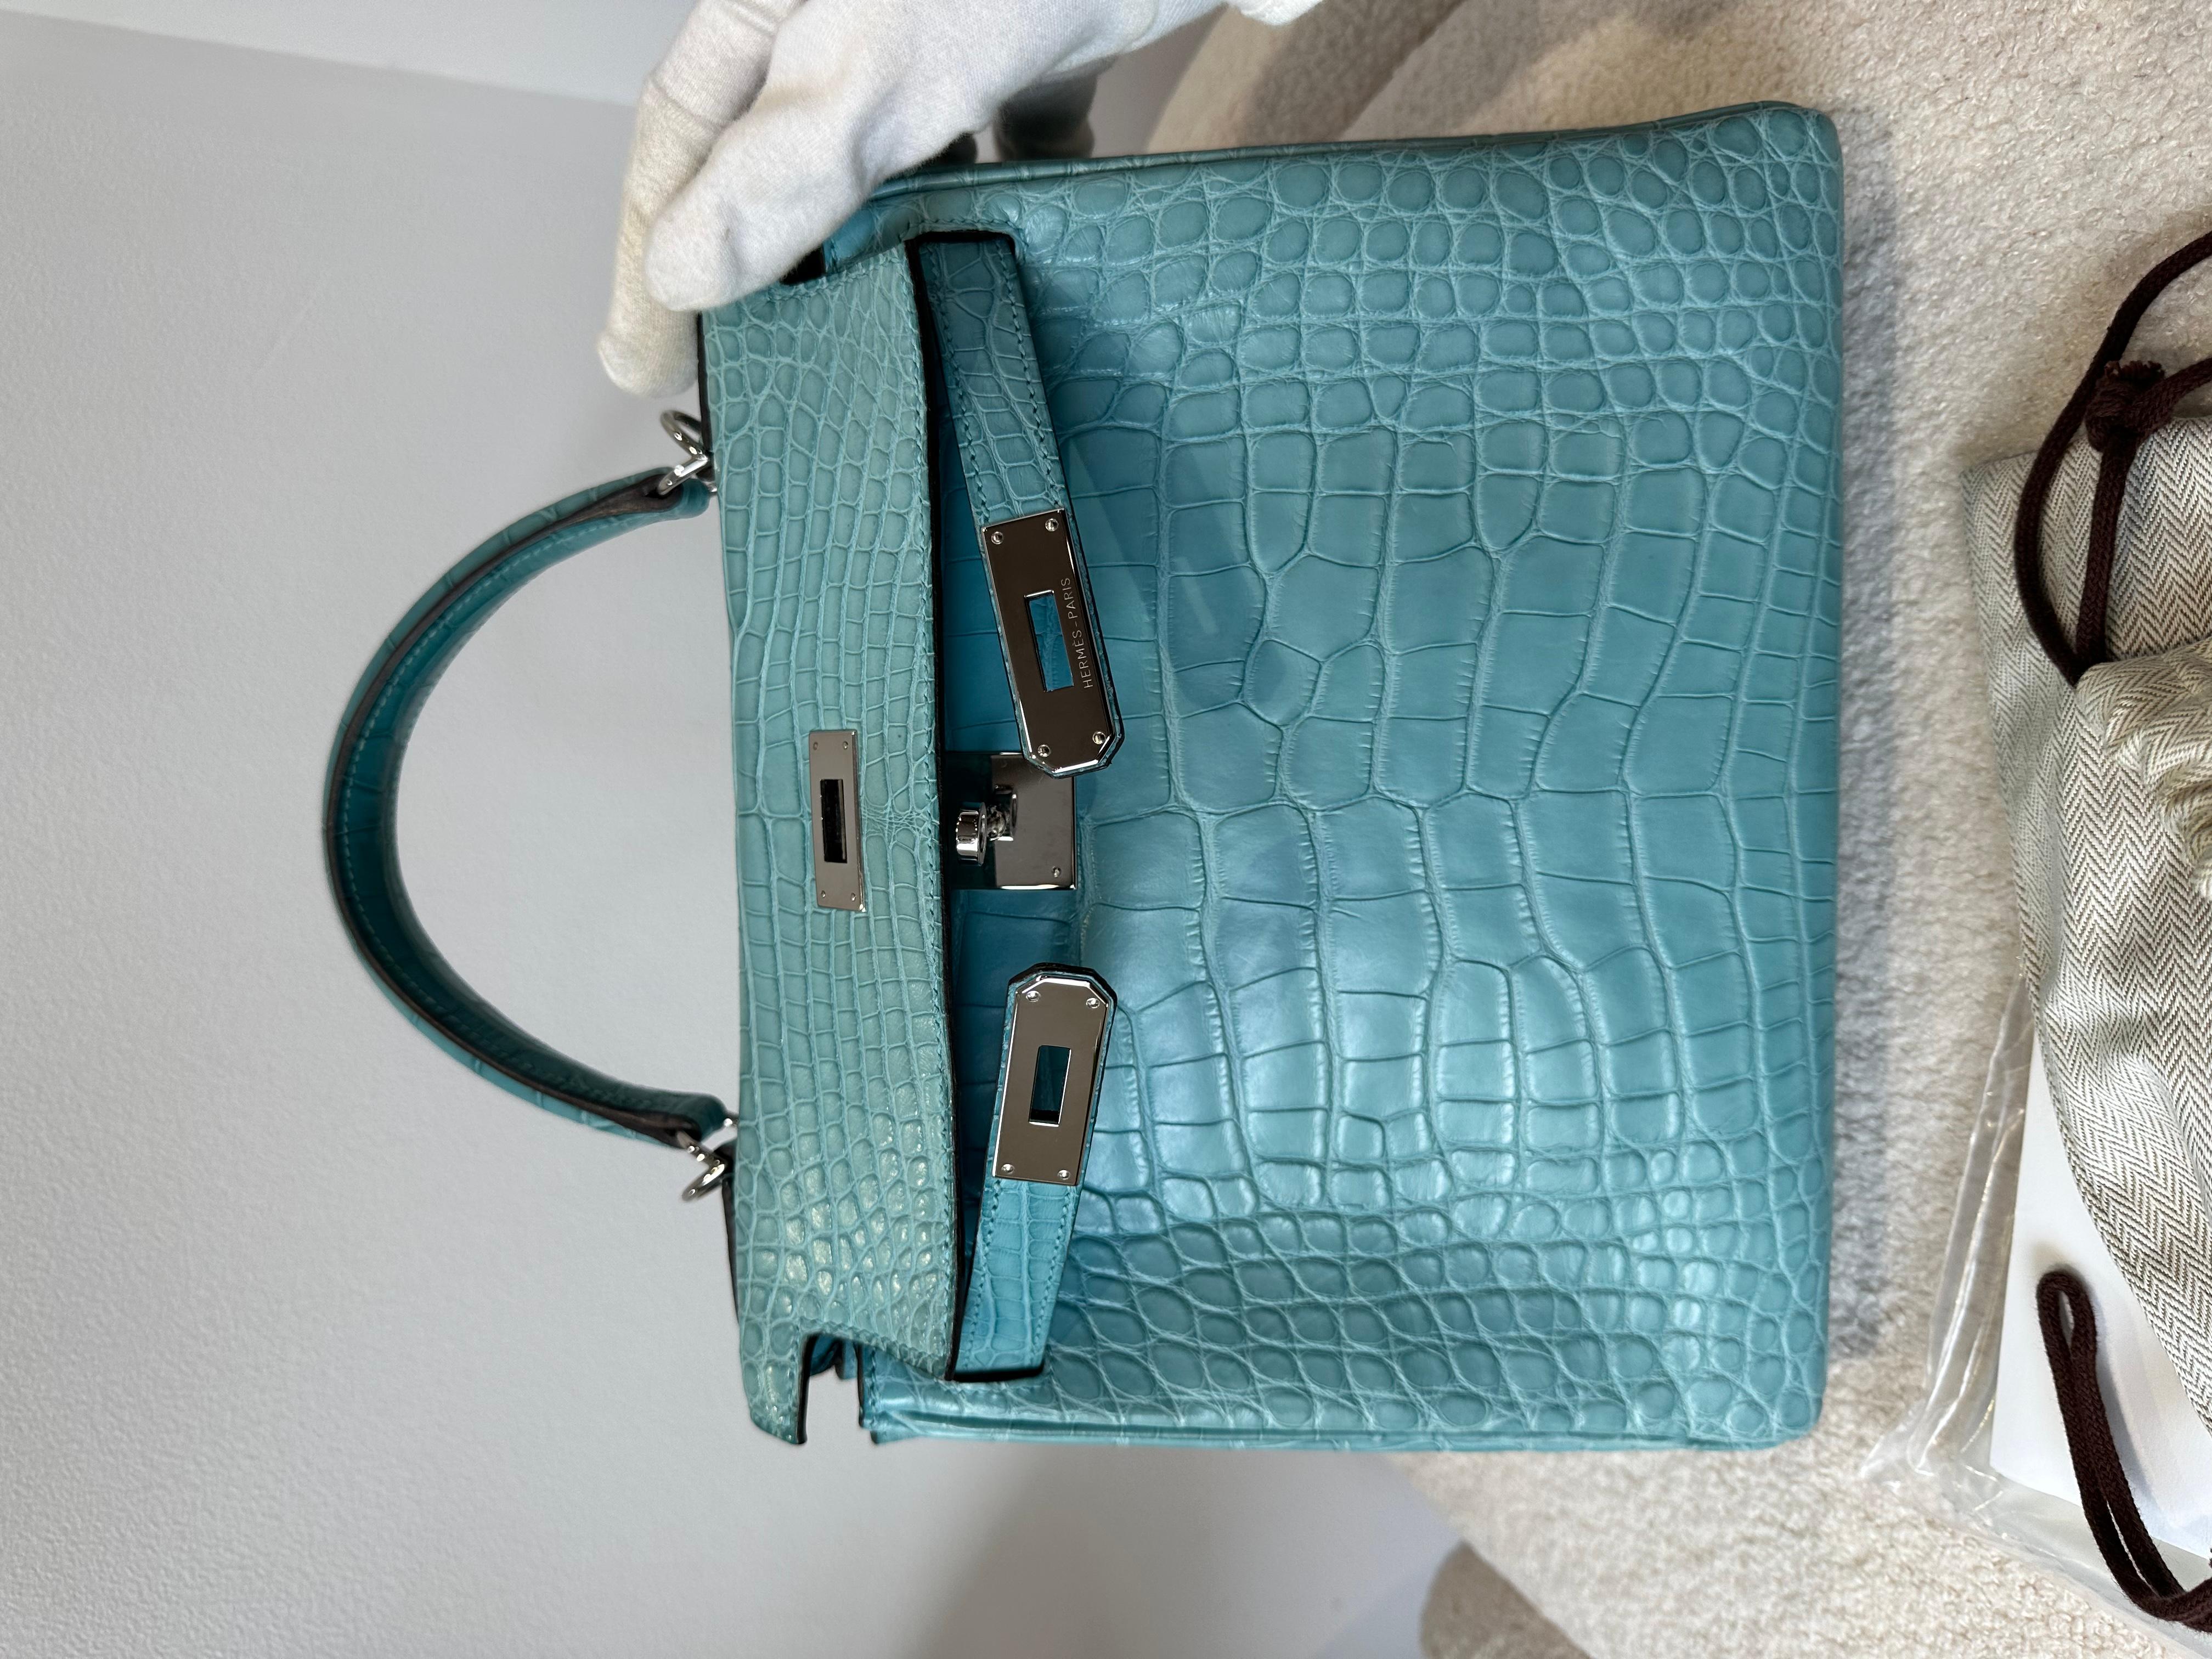 Hermes Kelly 28 Matte Crocodile Bleu palladium hardware bag In Excellent Condition For Sale In London, England